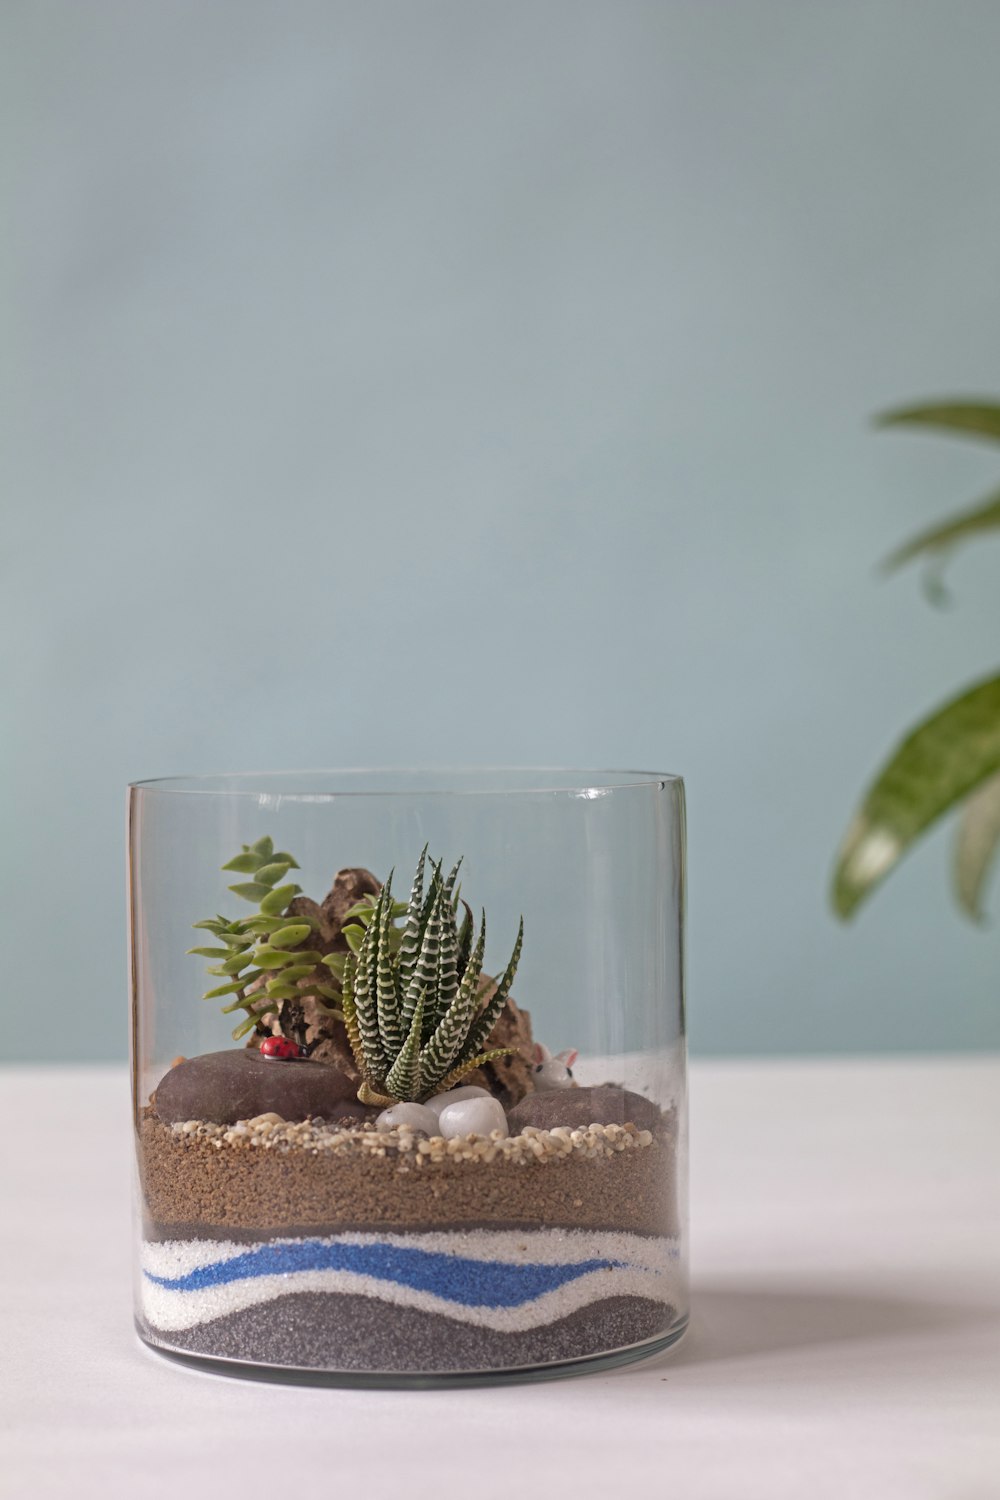 green cactus plant on clear glass bowl photo – Free Taiwan Image on Unsplash